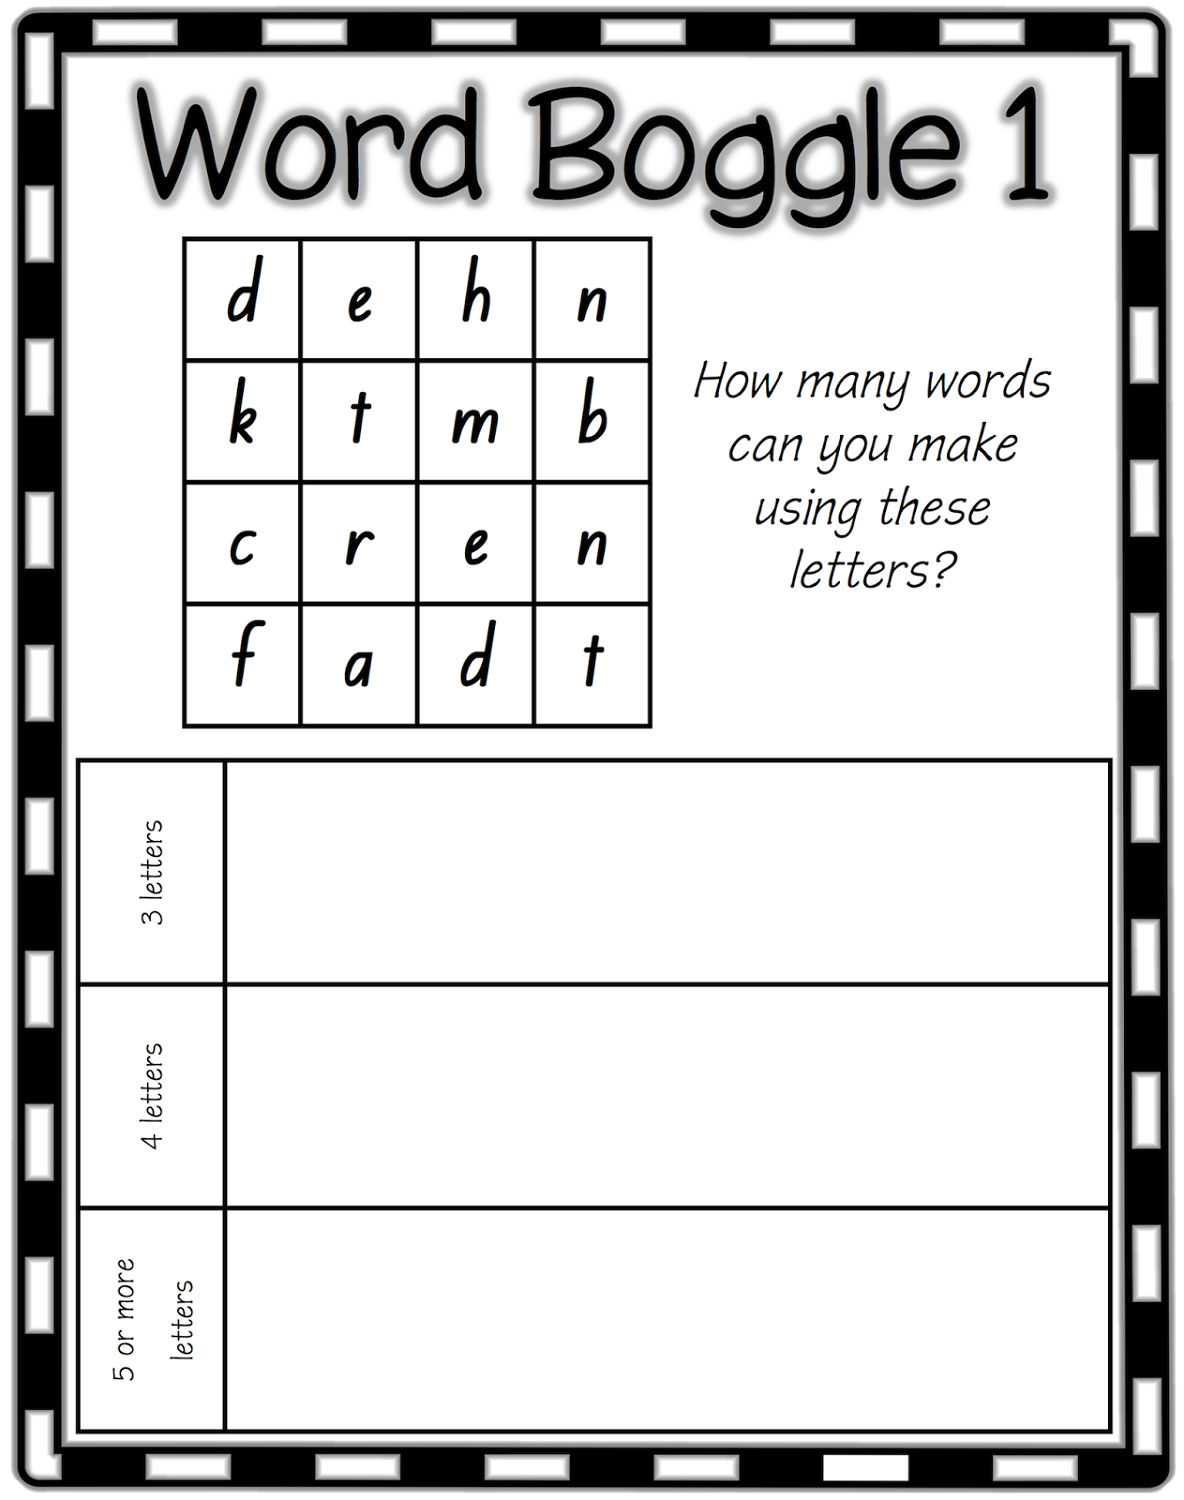 boggle word games for kids